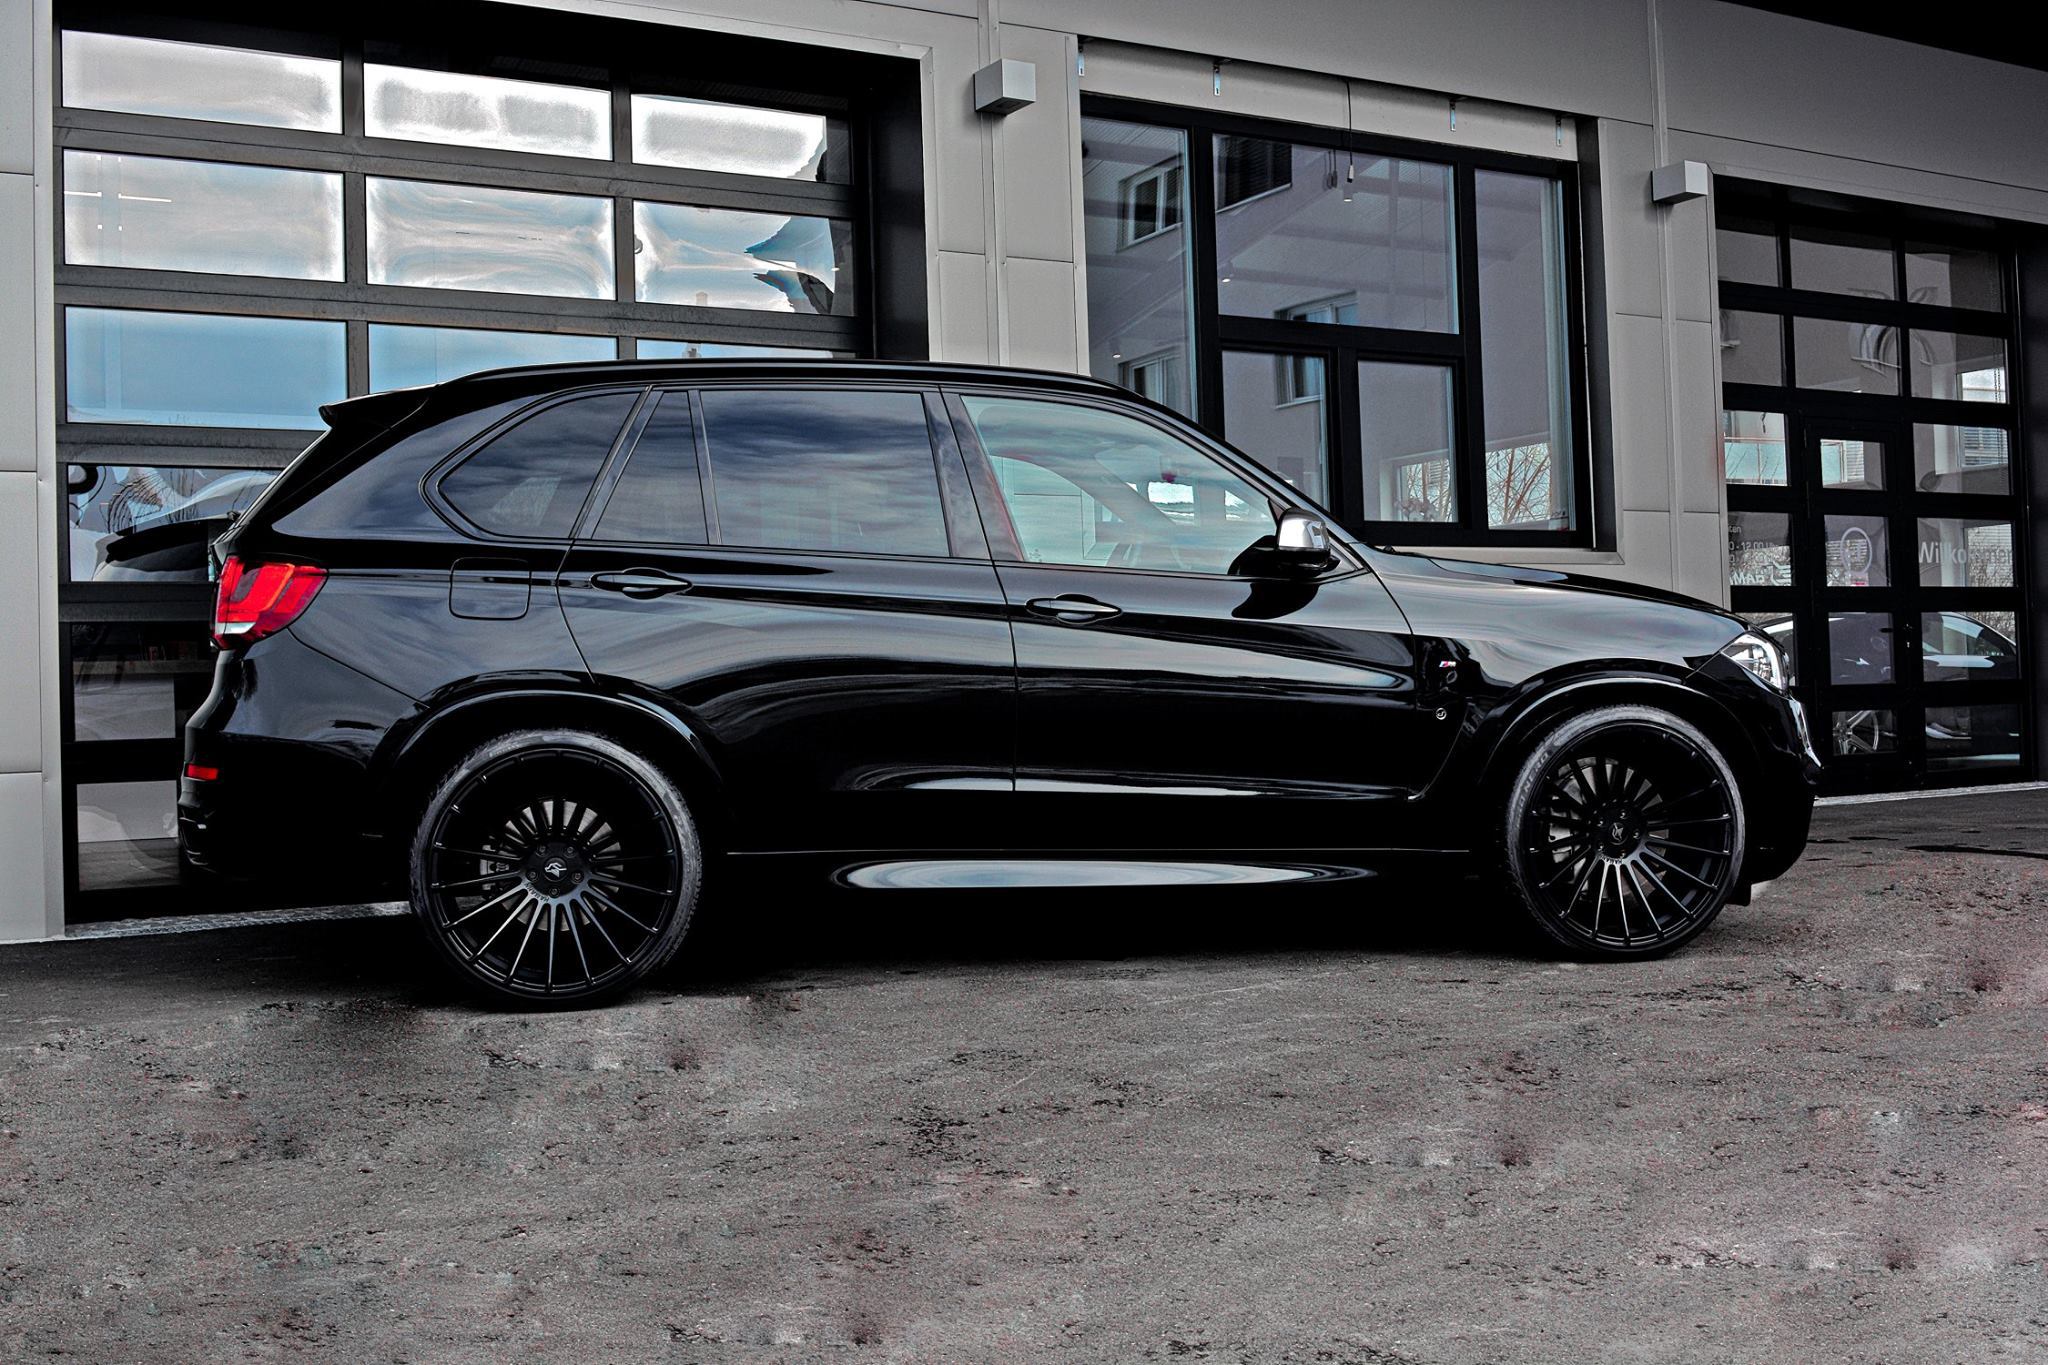 BMW X5 Tuning Wallpapers Images Photos Pictures Backgrounds